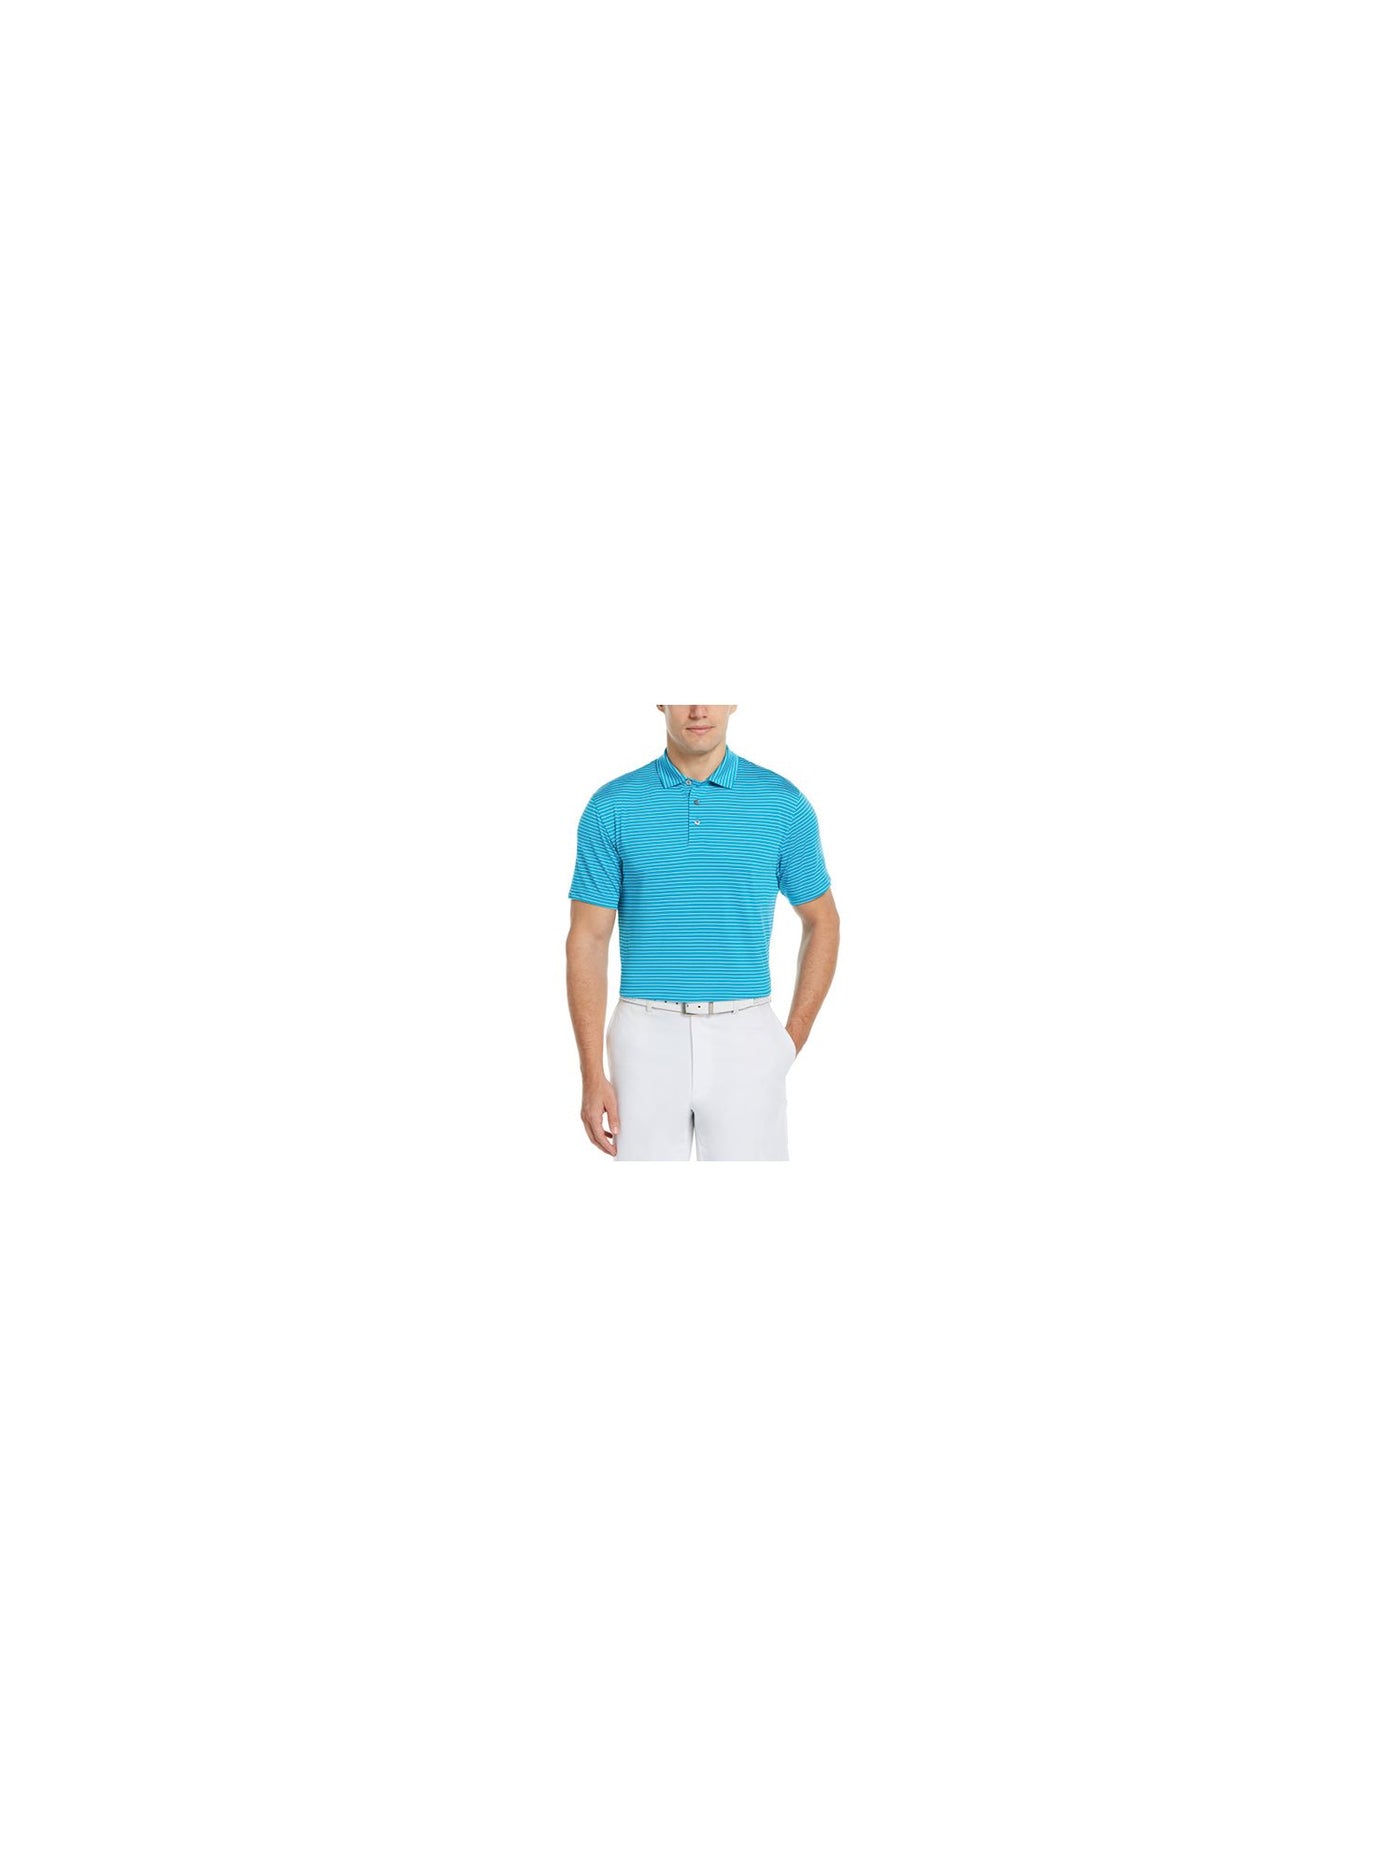 HYBRID APPAREL Mens Turquoise Athletic Fit Moisture Wicking Polo XL